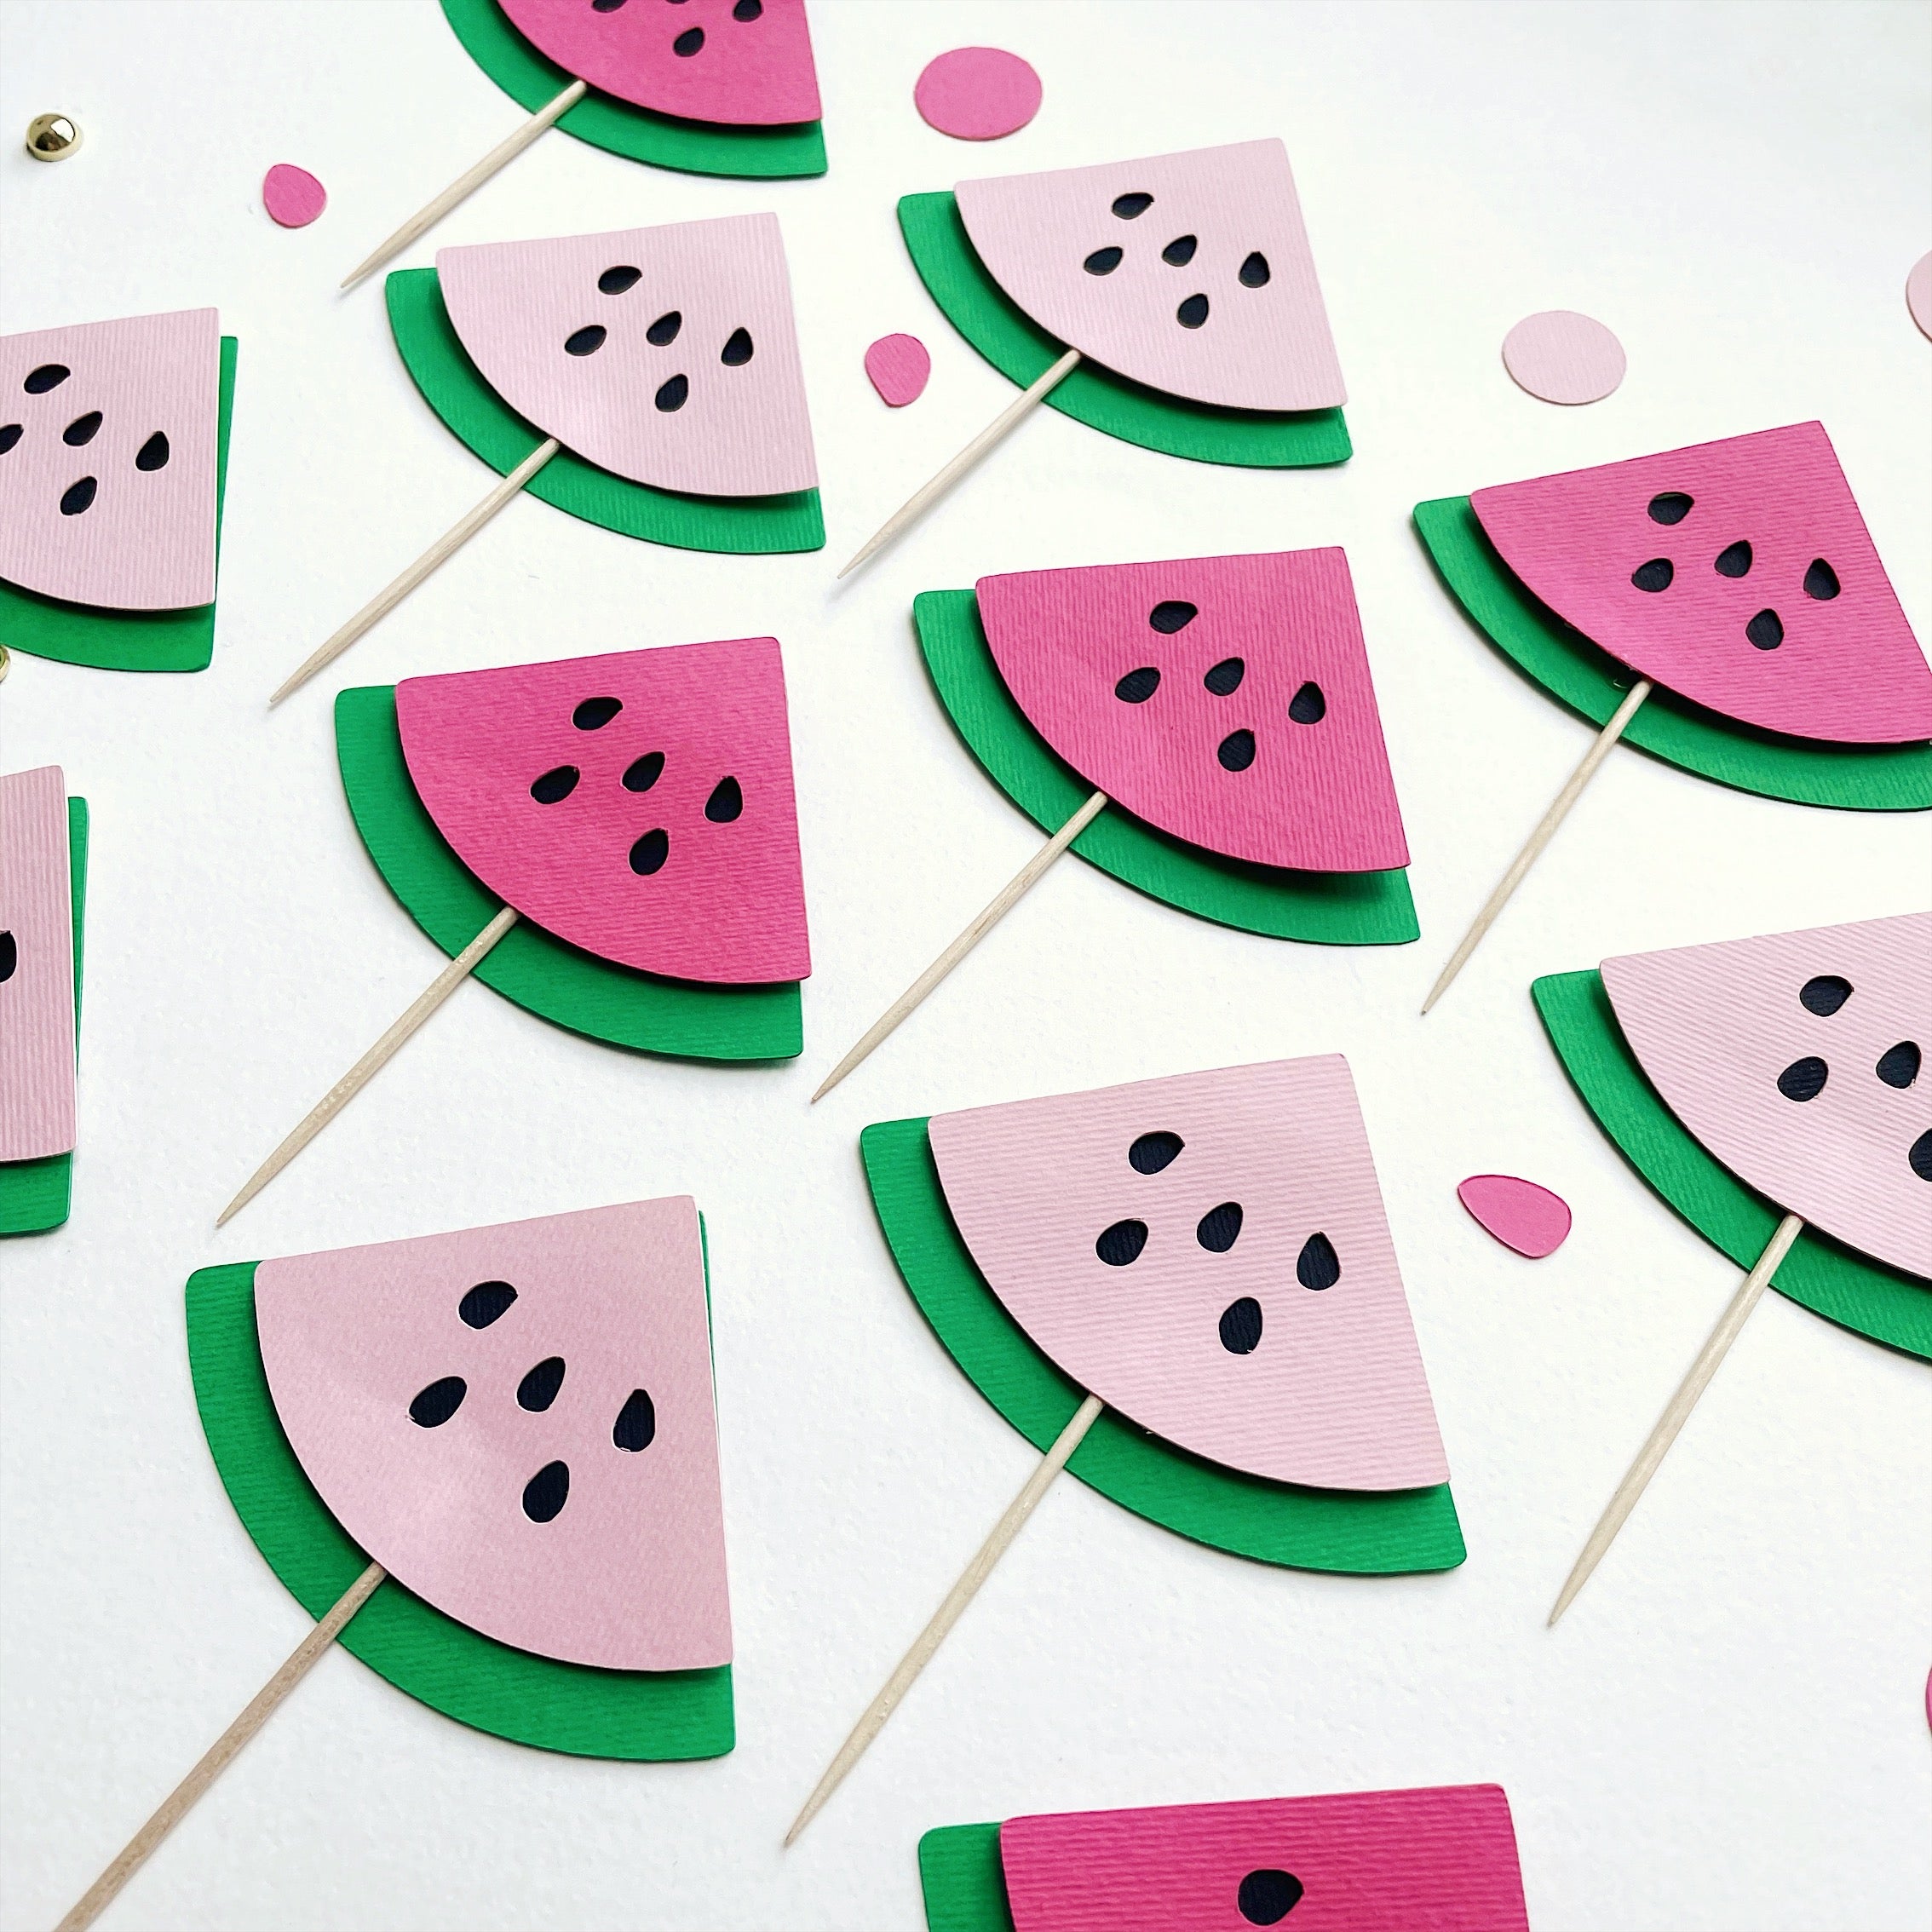 Watermelon Cupcake Toppers Watermelon Birthday Decorations Watermelon Cupcake Toppers Watermelon themed party